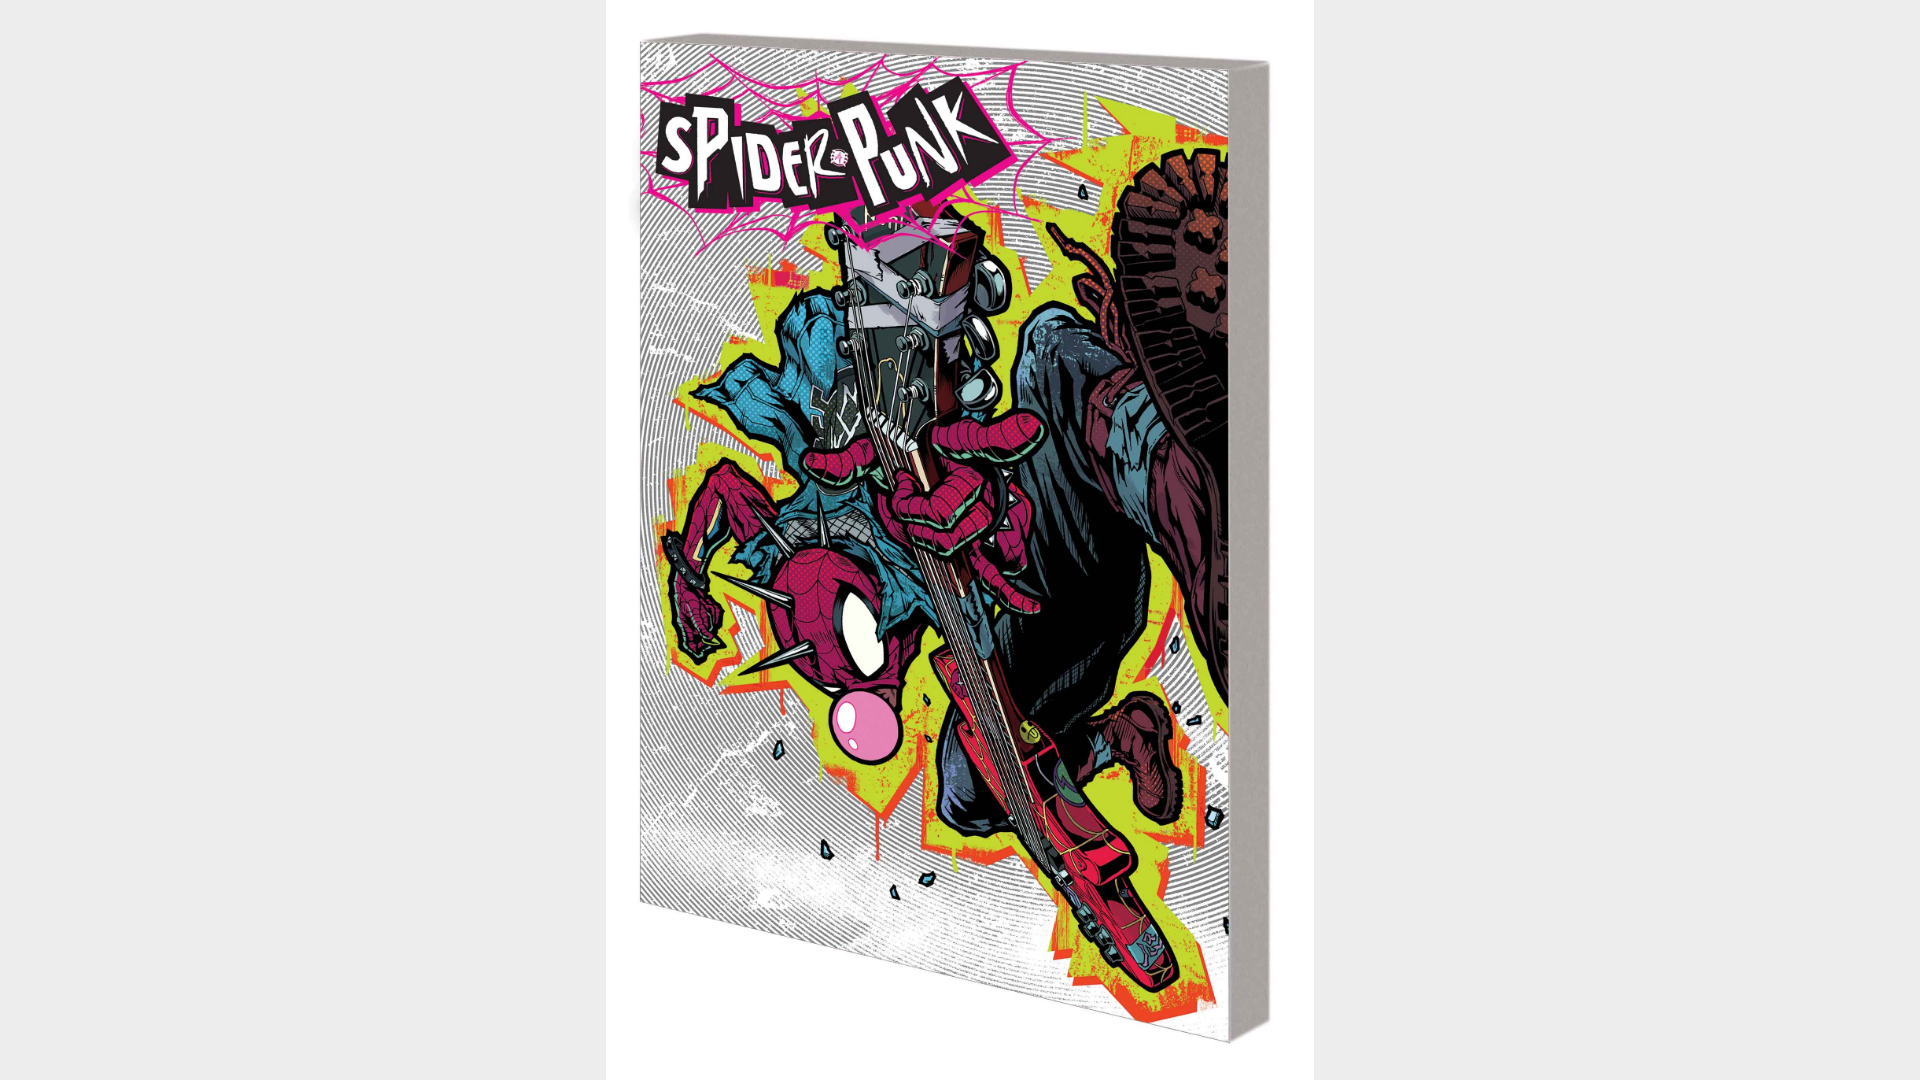 SPIDER-PUNK: ARMS RACE TPB